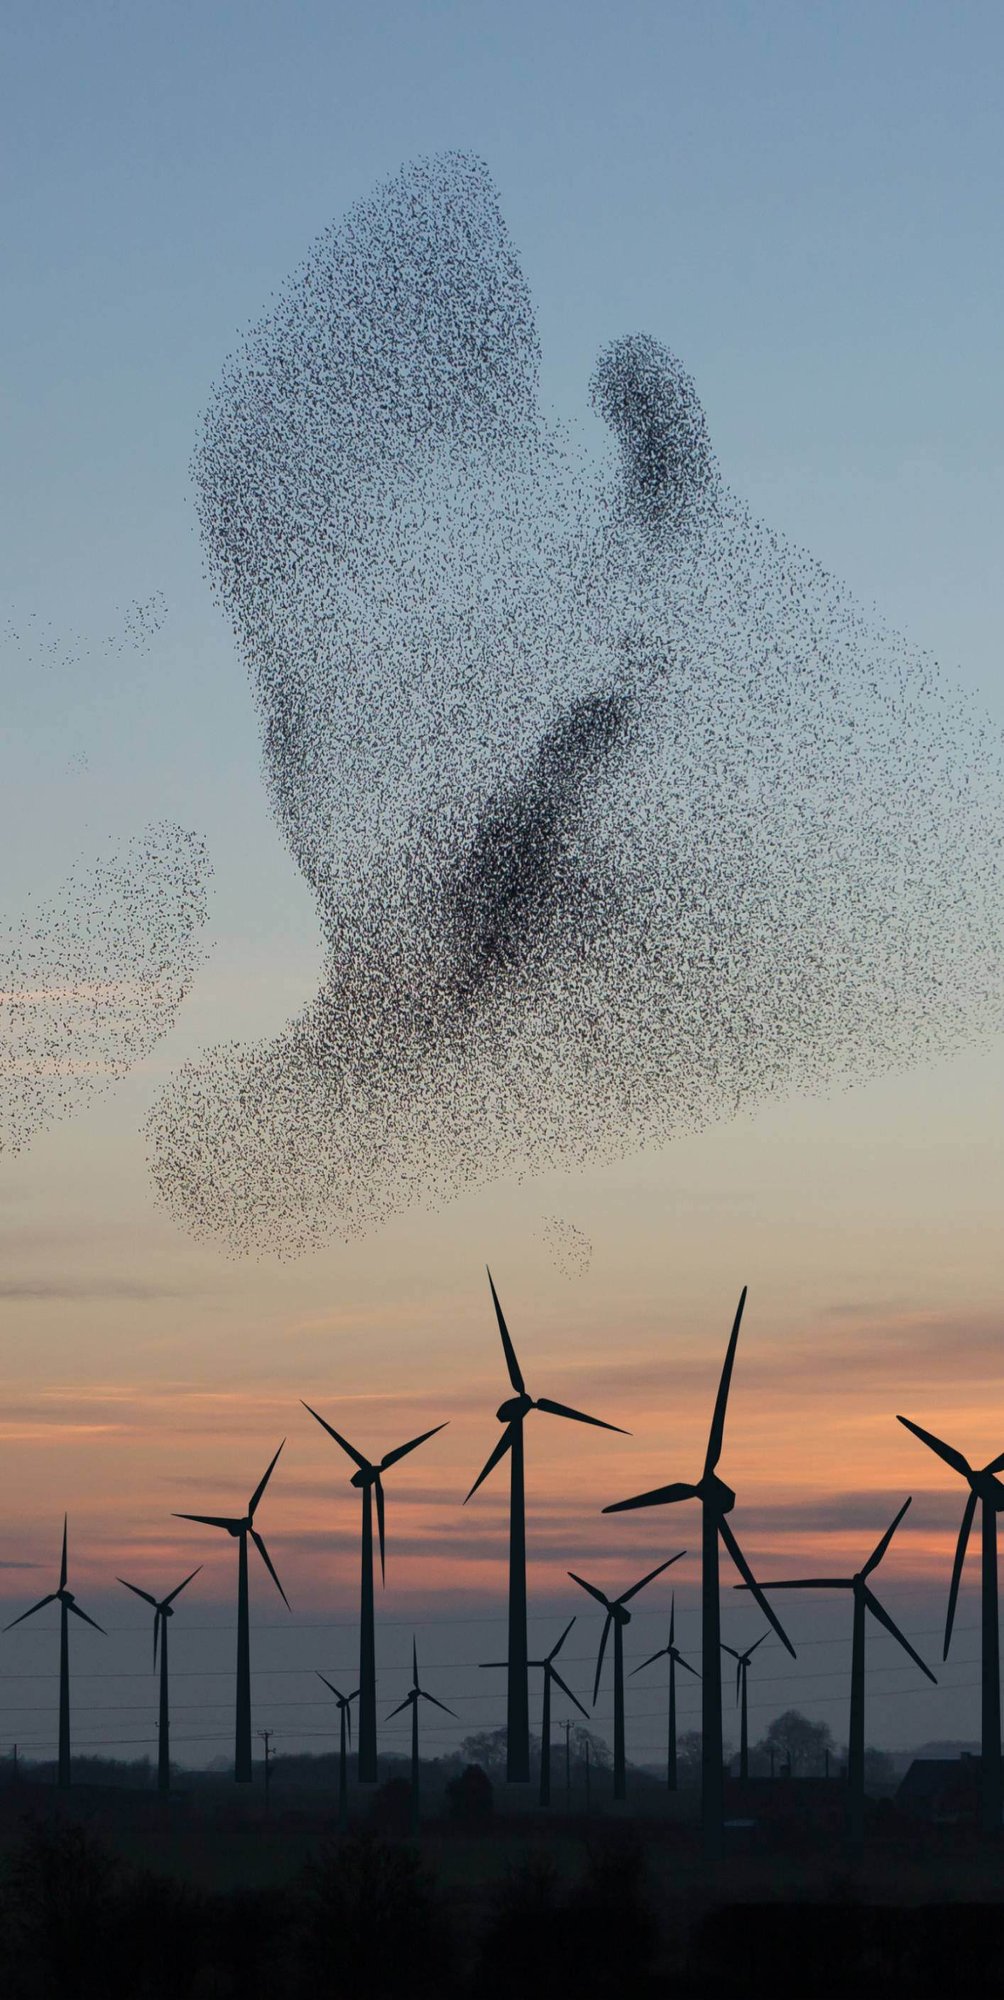 A large flock of birds flying in formation over several wind turbines at twilight